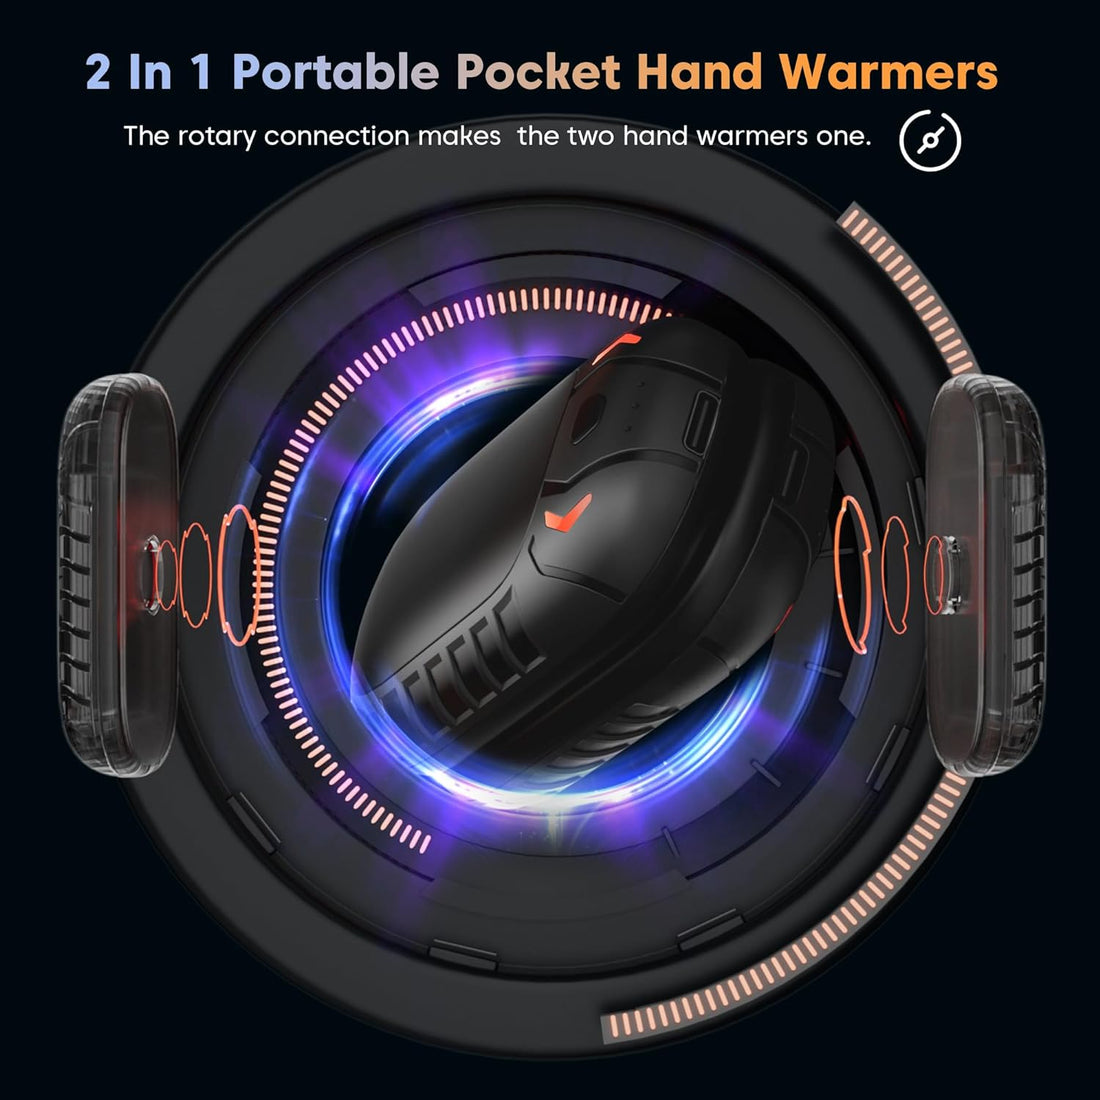 RORJOY Hand Warmers Rechargeable,2 in 1 Portable Electric Portable Pocket Heater Reusable,3 Levels Up to 12 hrs Heat, Quick Charge USB Hand Heater Great Gift for Heat Therapy, Outdoors, Hunting, Golf